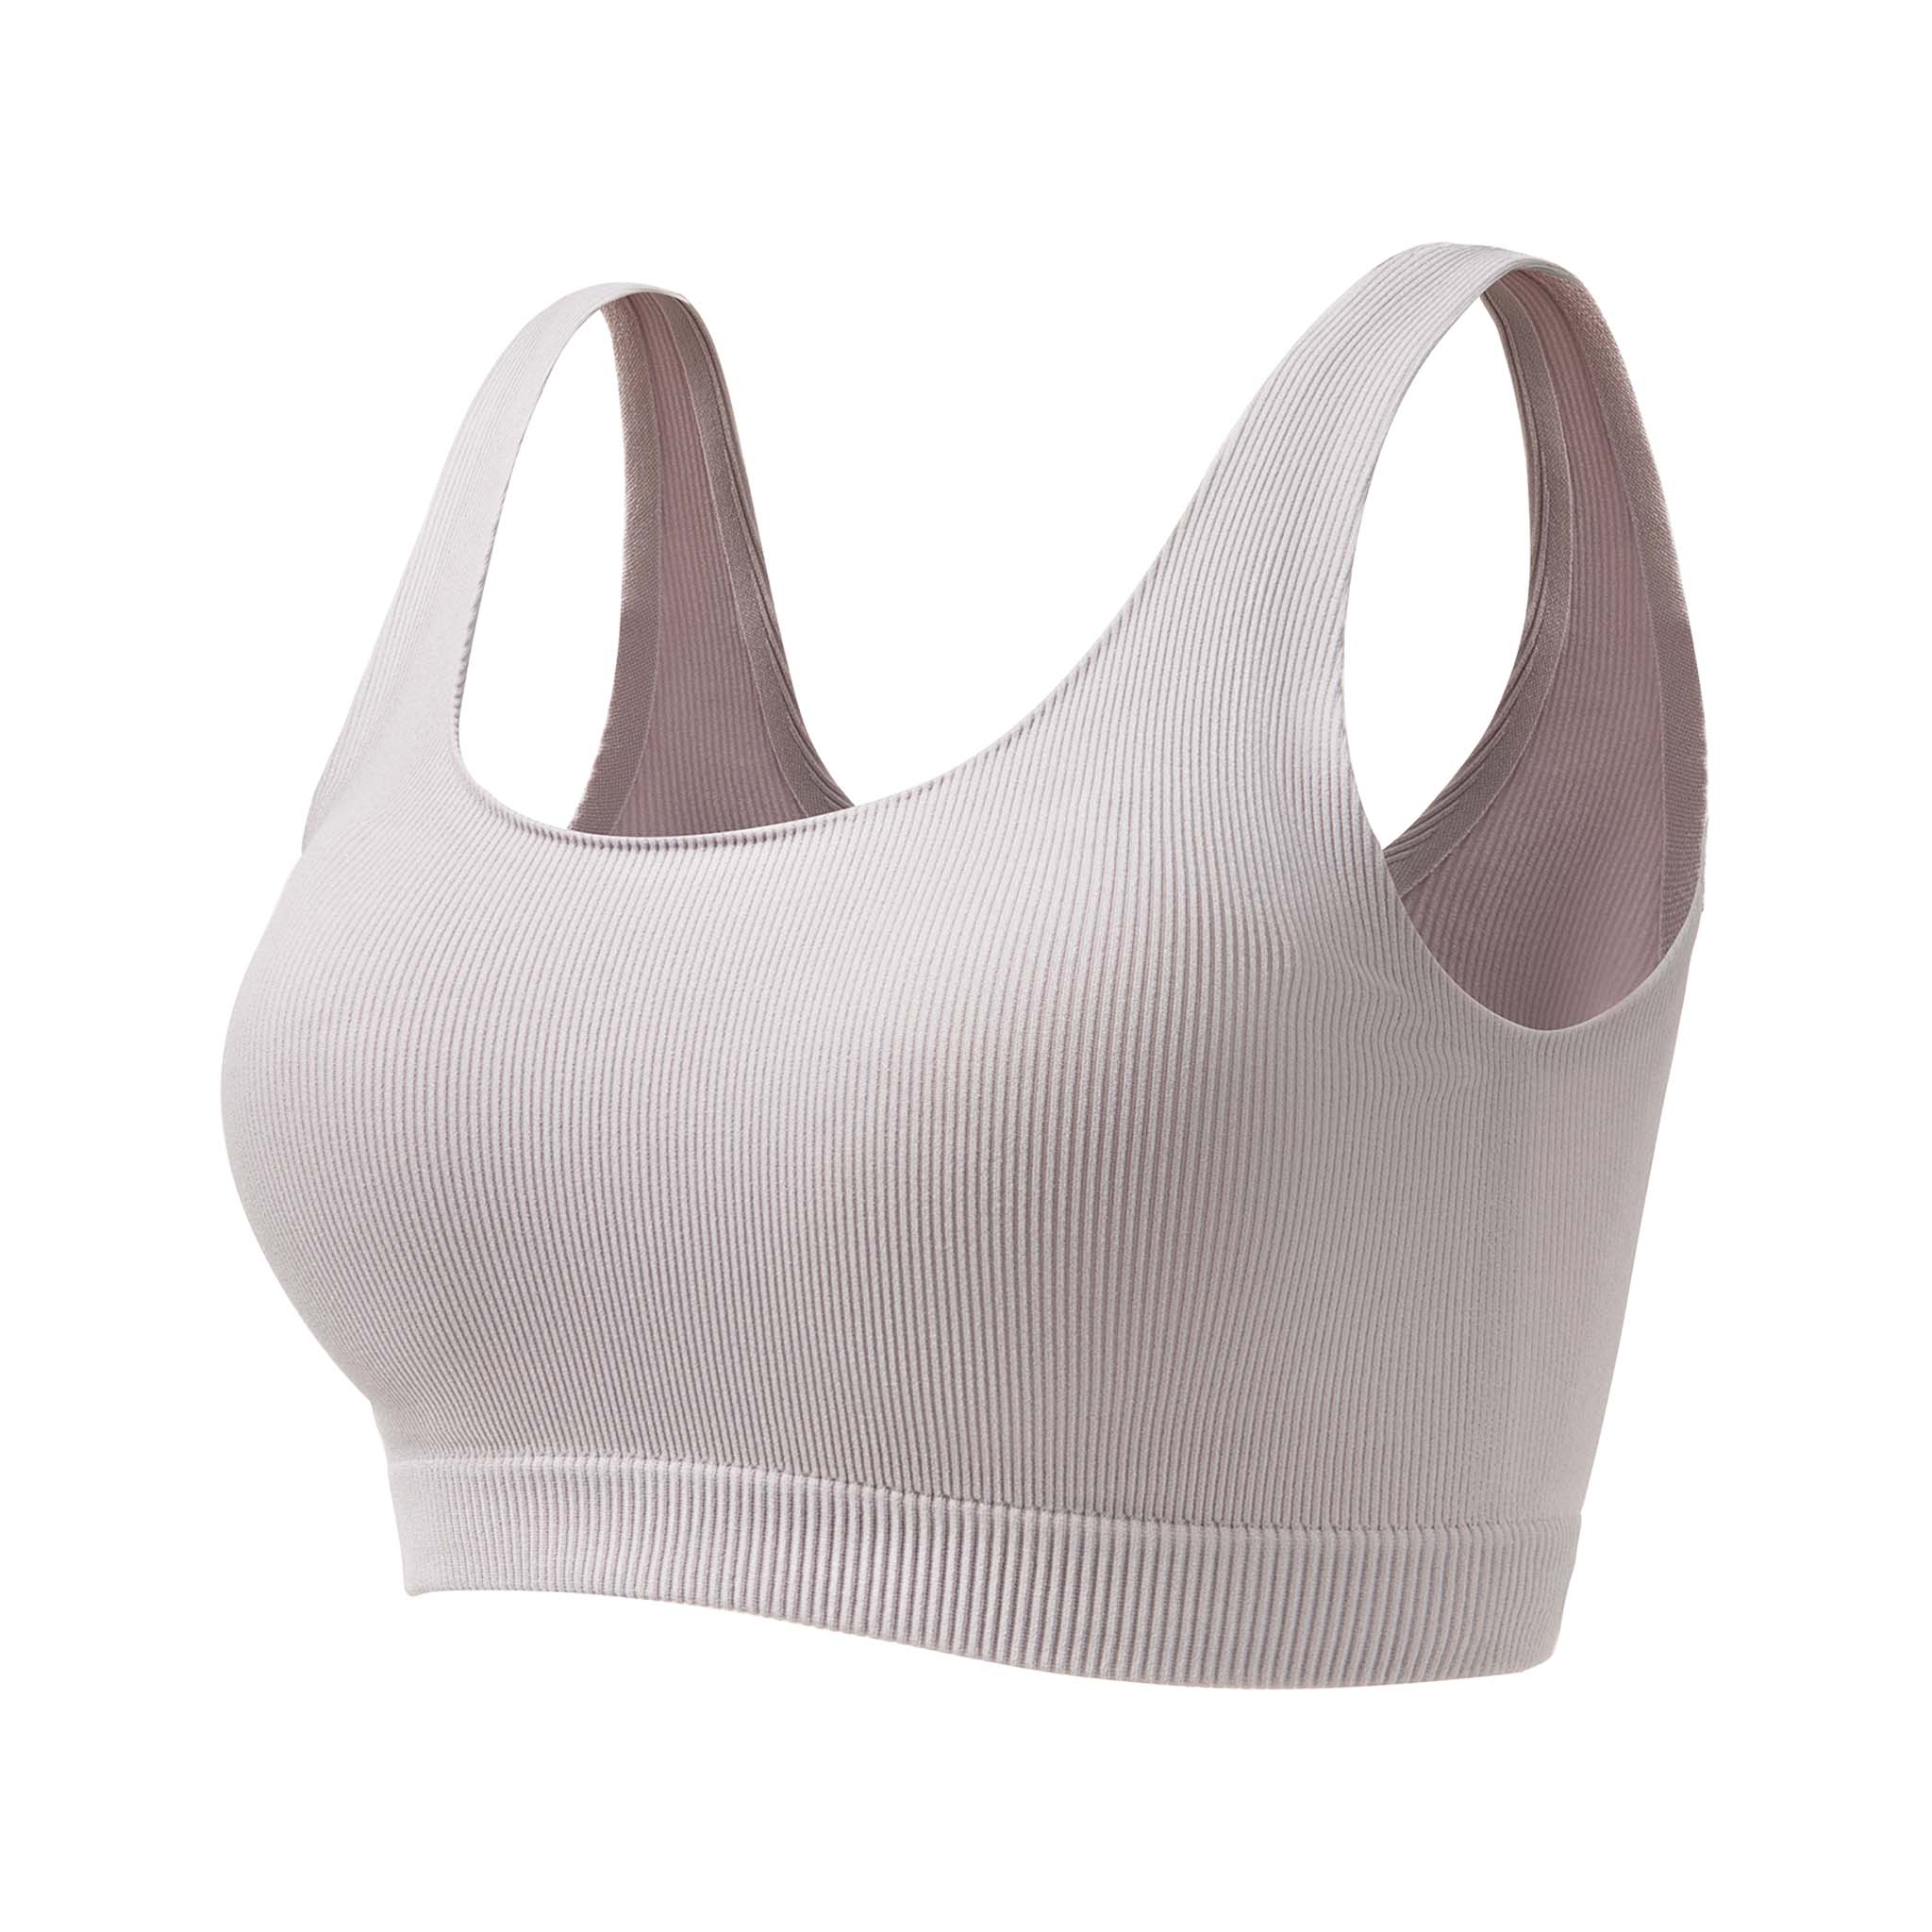 Sports Bras for sale in Waverly, Illinois